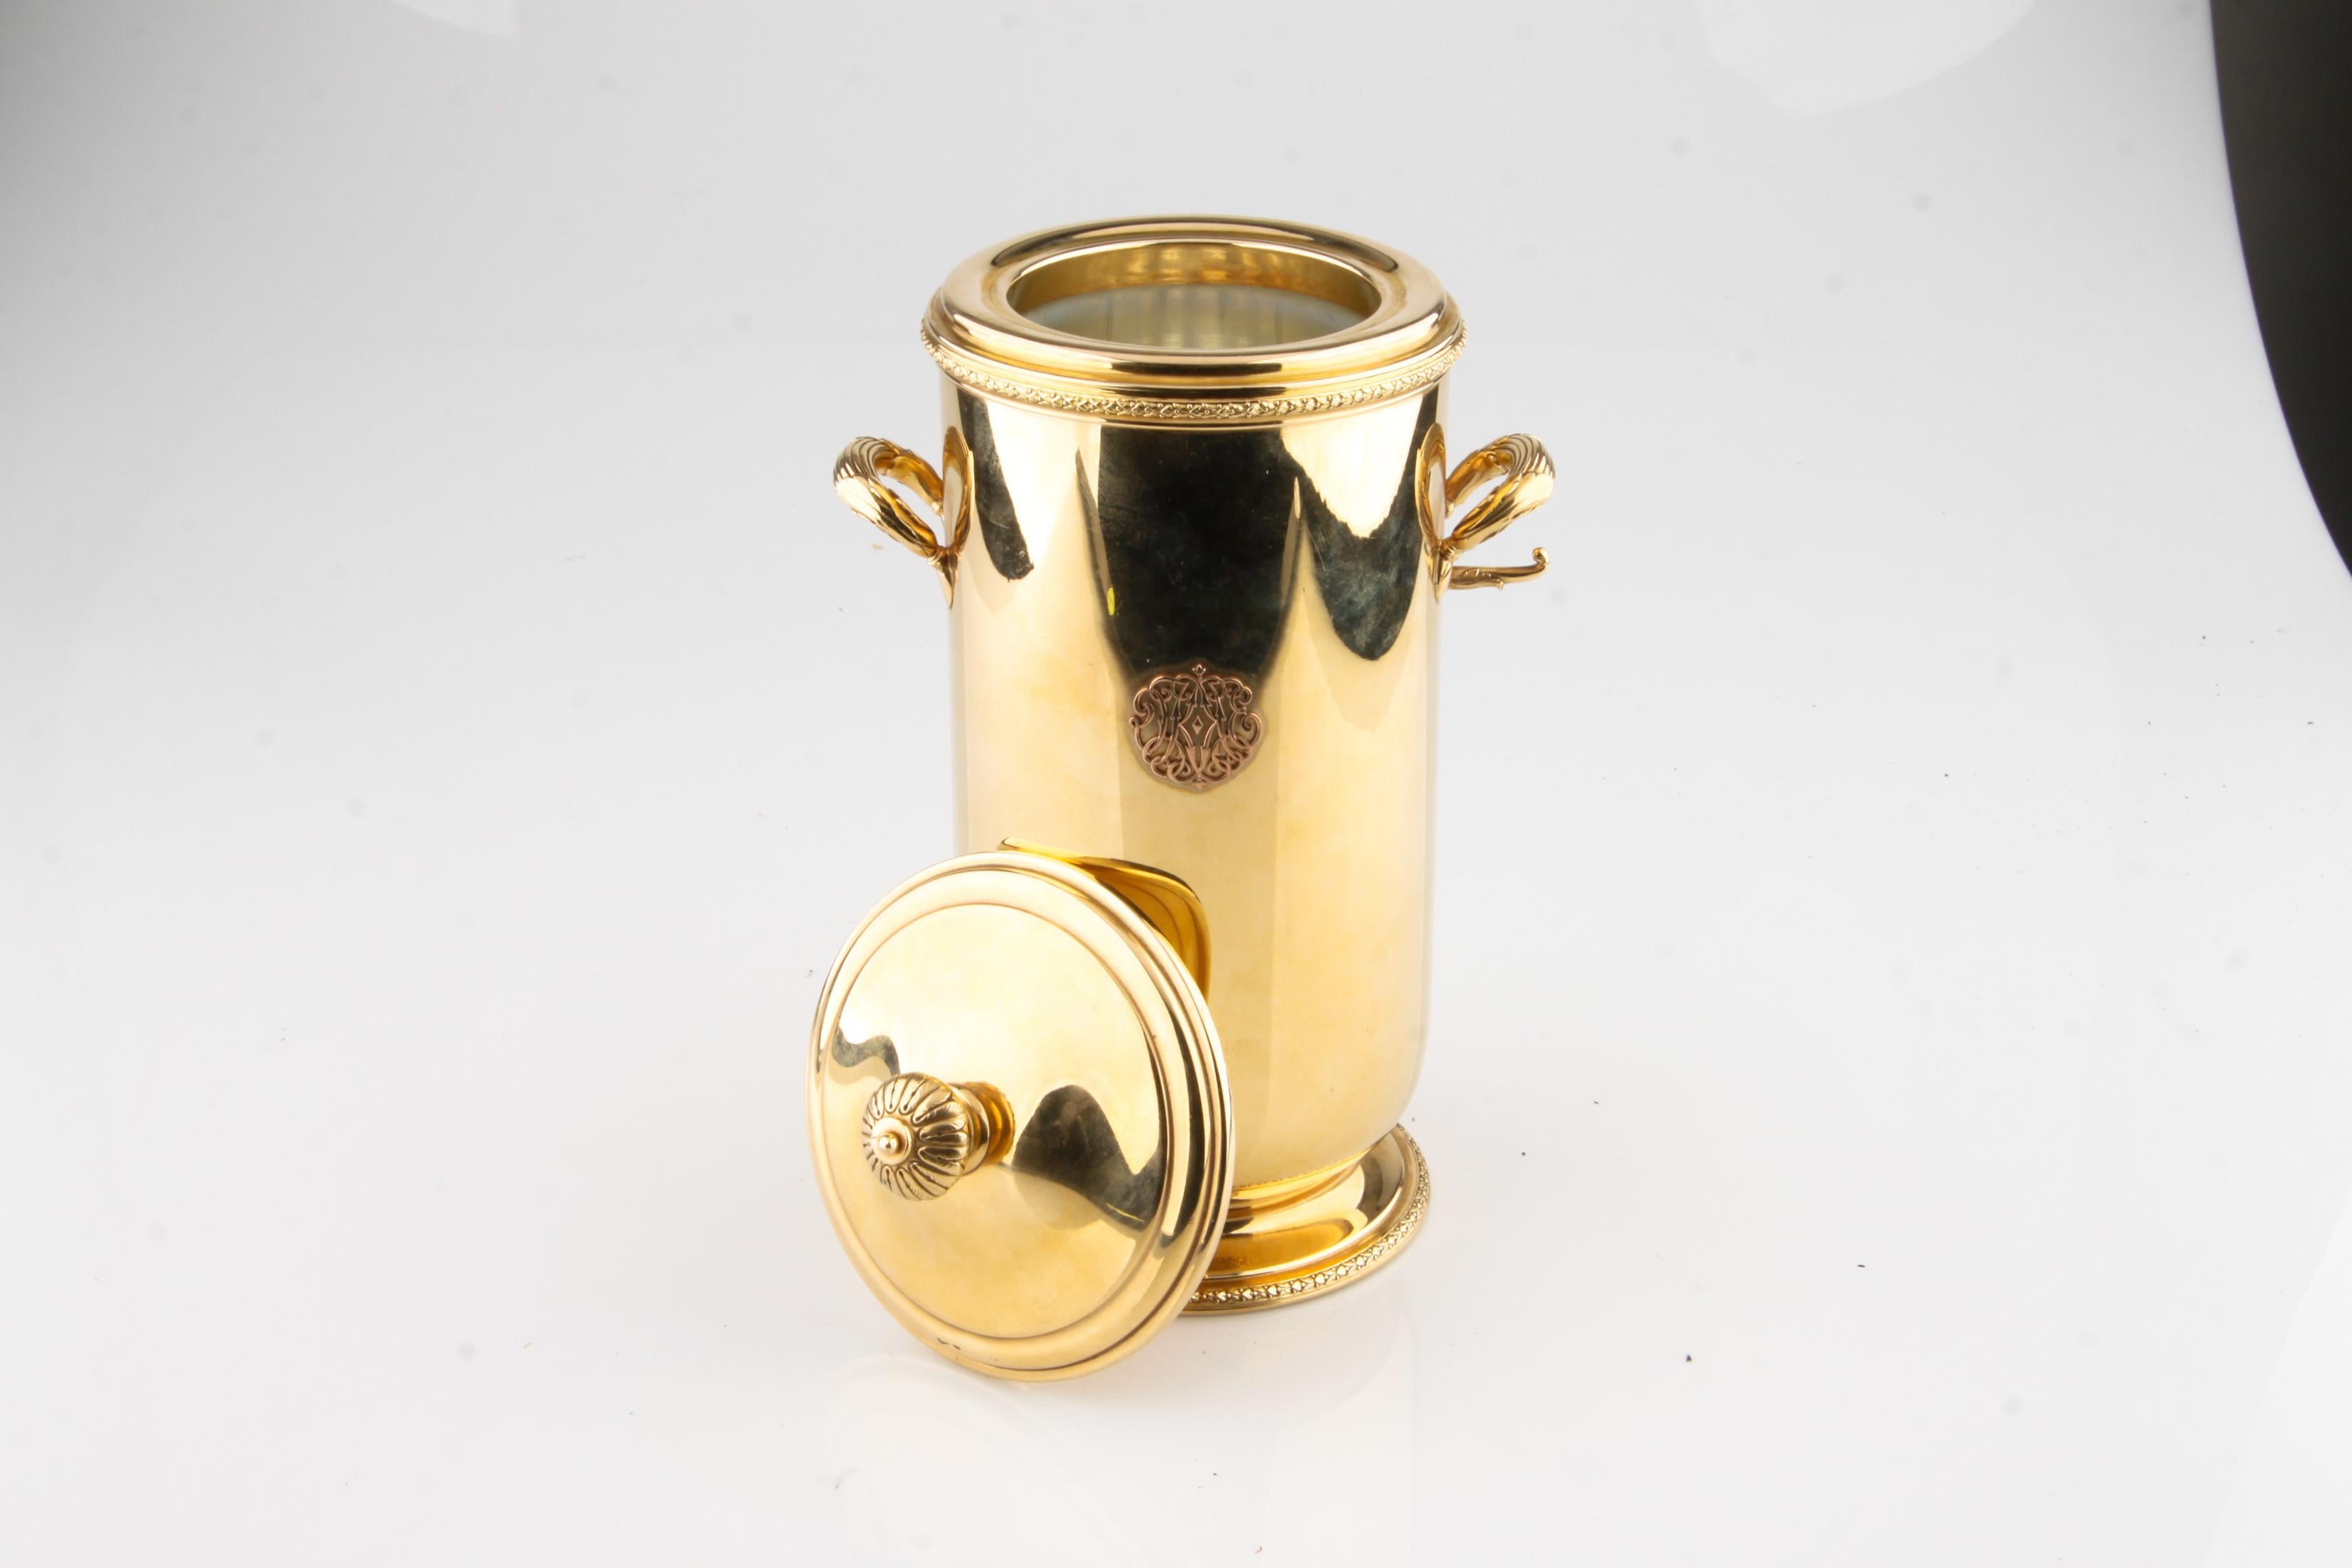 Made in the USA in the 1970s
Made of 14k Yellow Gold and Glass
Hallmarked with '14 KT' and signed 'Cartier'
Of cylindrical shape with small acanthus handles and a removable lid with floral finial
Front with entwined monogram in relief
Height: 23